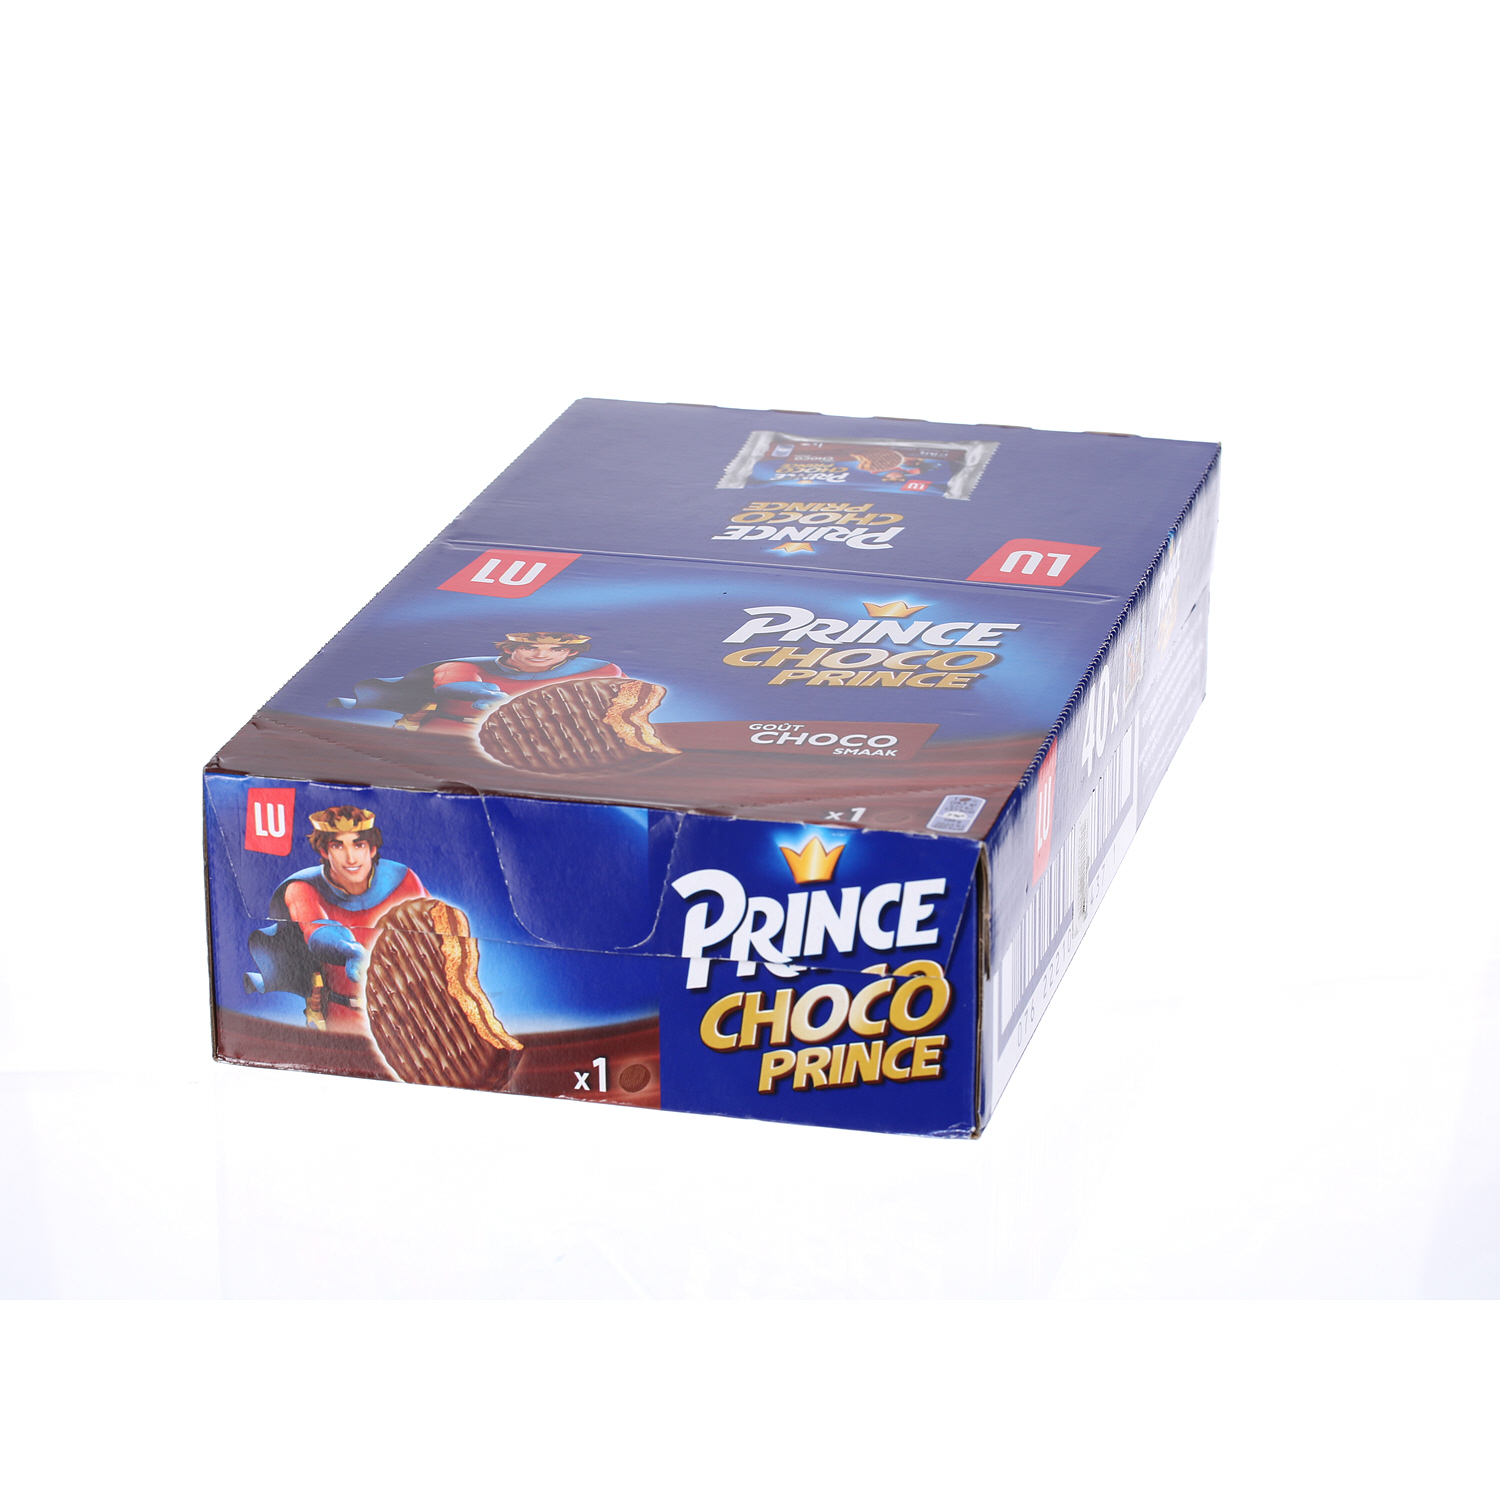 Lu Prince Choco Biscuits 28.5 g × 40 Pieces